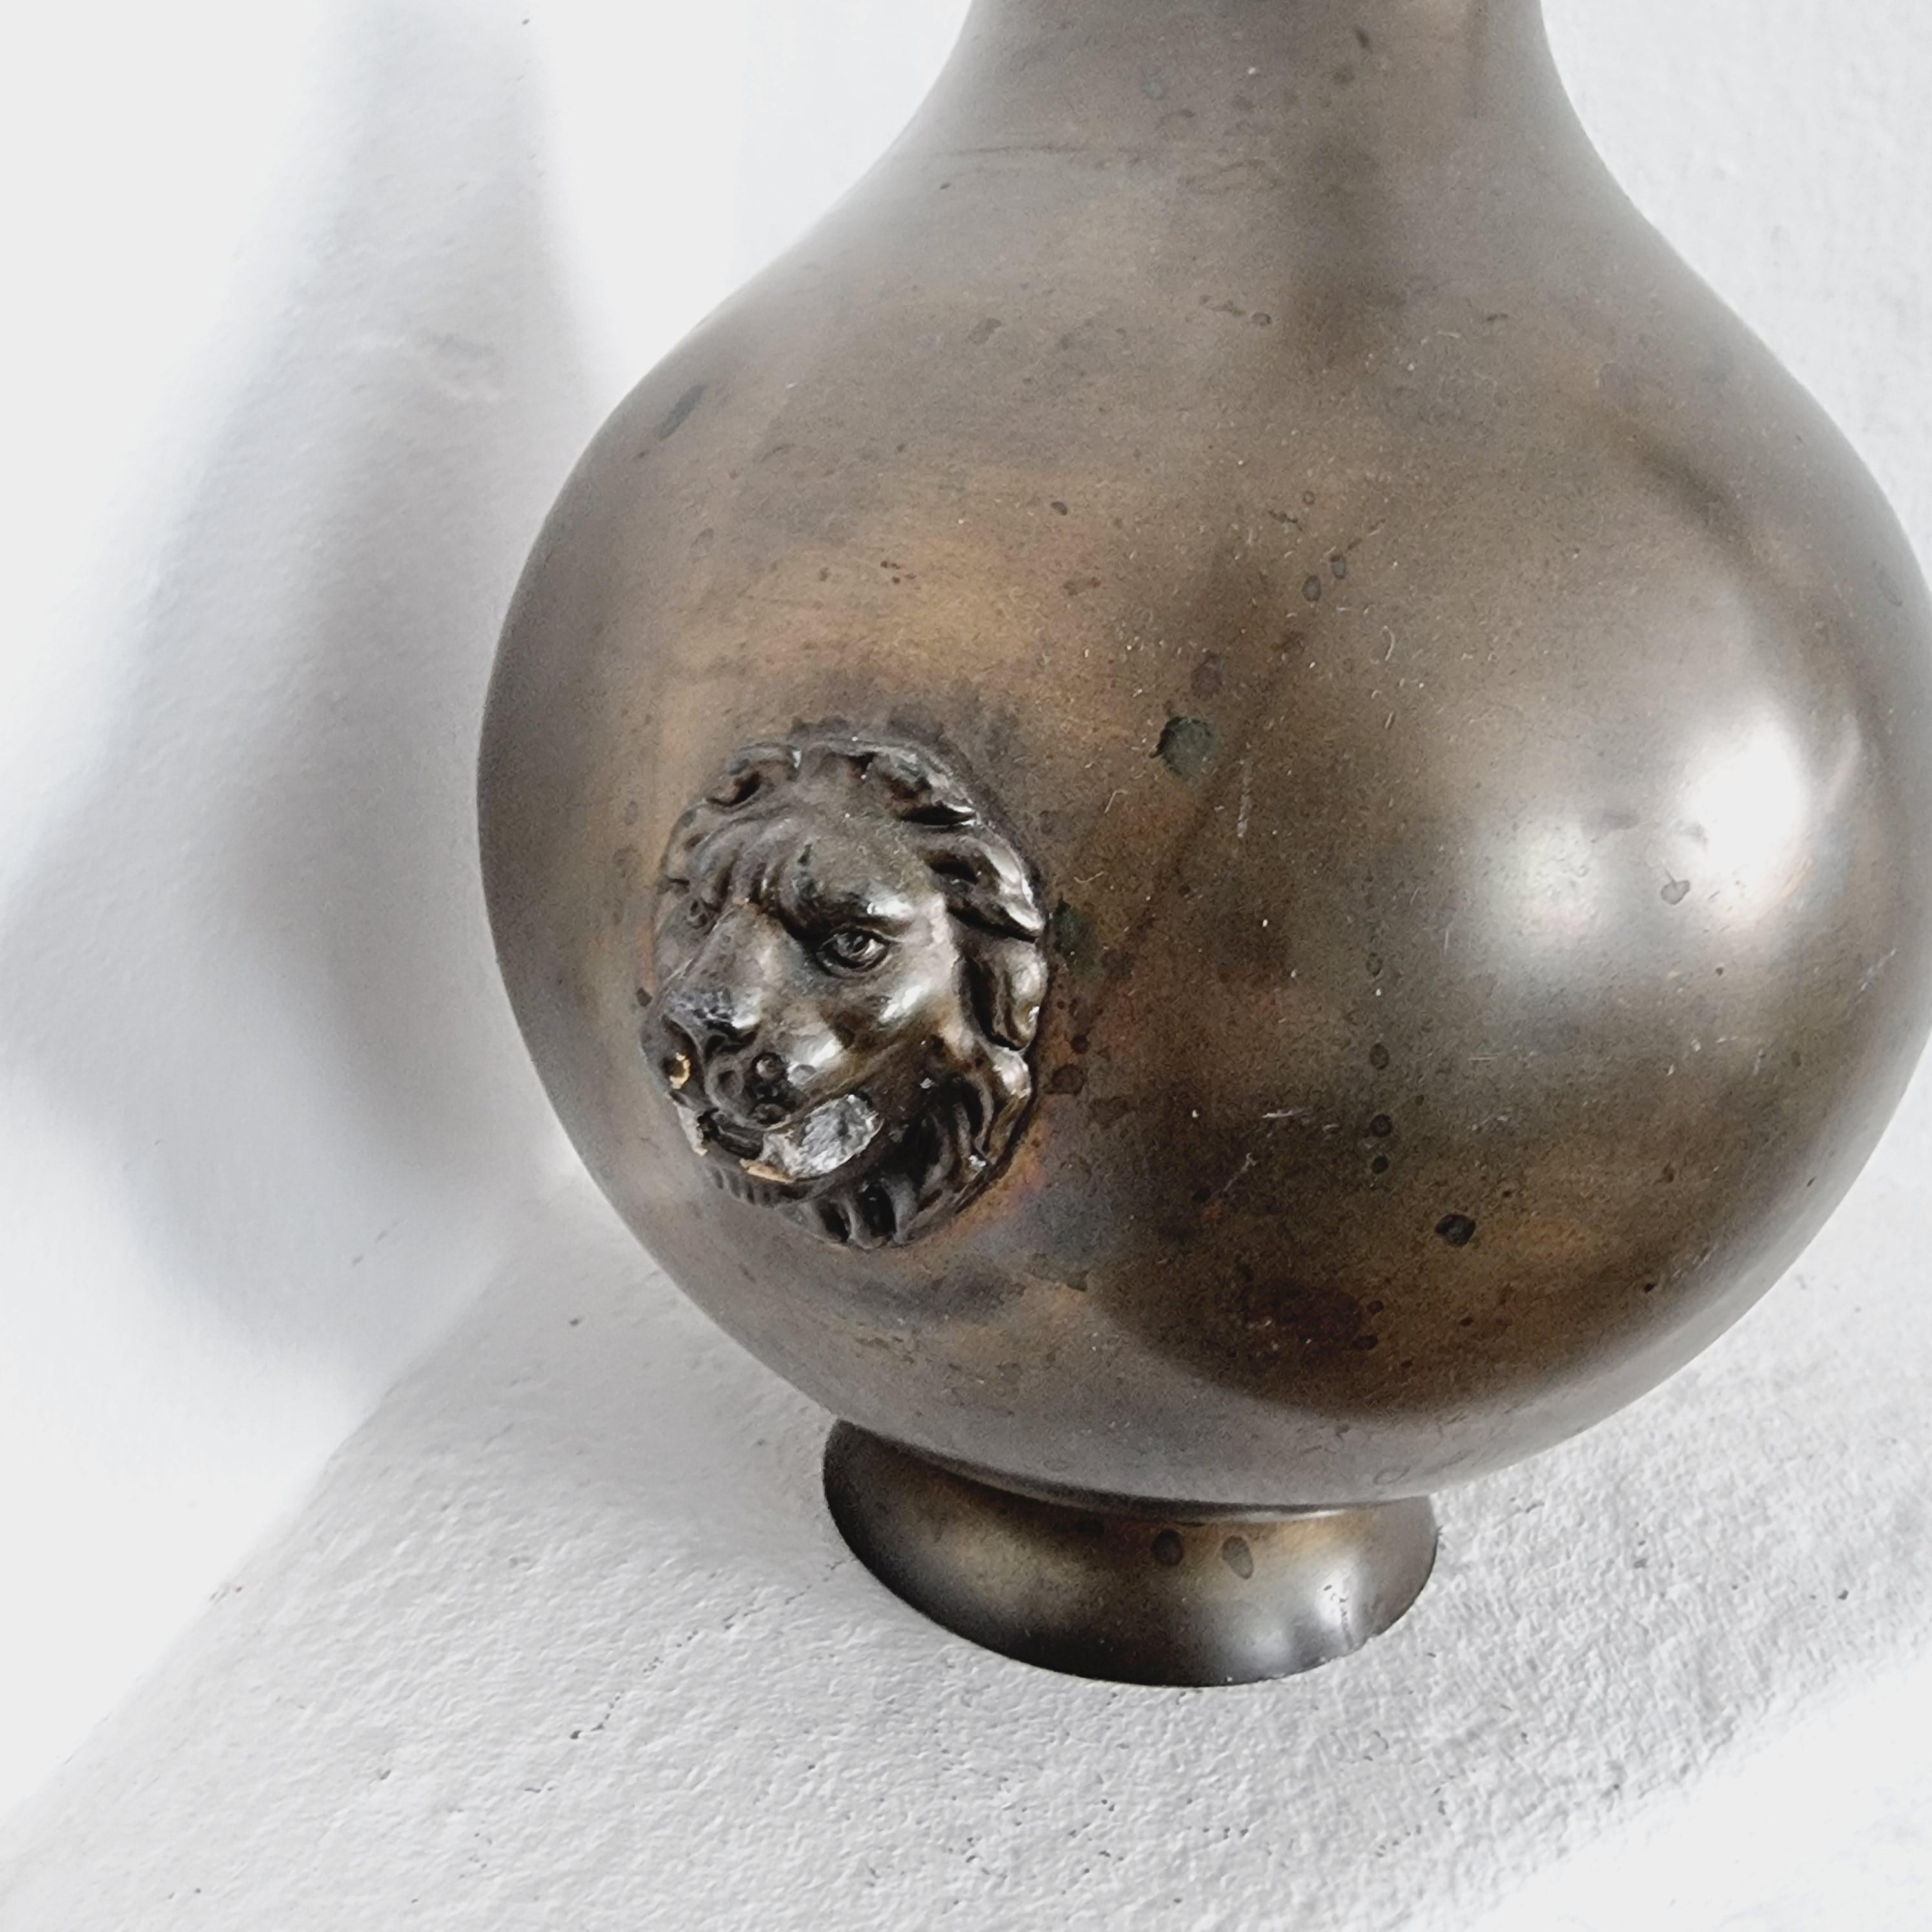 Unique vase by Gunnar Åkerlind for Stjärnmetall, Sweden, early 1900s. 
In patinated zinc alloy, with decor of lions. Marked Stjärnmetall. 

Manufactured in the early 1900s in Heden, outside Mariefred Sweden. Swedish grace, 1930s.

In good